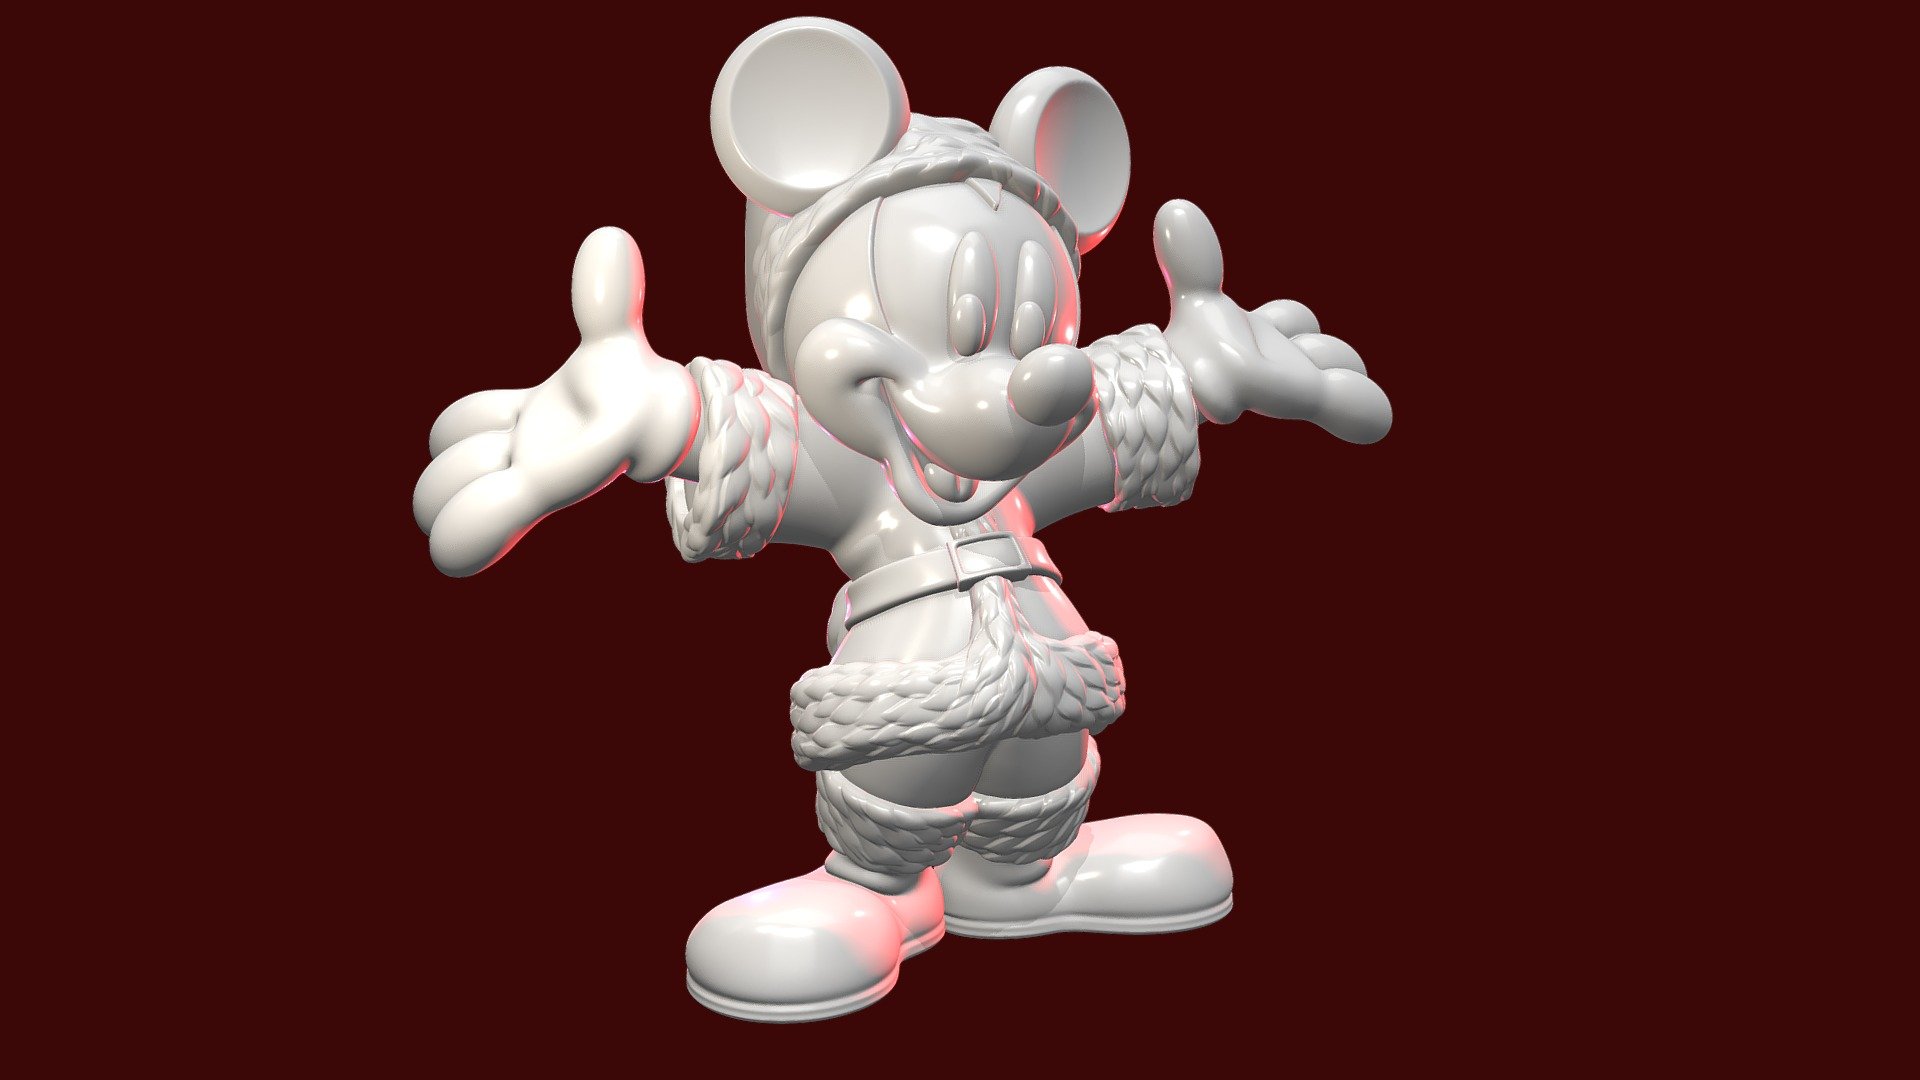 Mickey Mouse is a funny animal cartoon character and the mascot of The Walt Disney Company. He was created by Walt Disney and Ub Iwerks at the Walt Disney Studios in 1928. An anthropomorphic mouse who typically wears red shorts, large yellow shoes, and white gloves, Mickey is one of the world's most recognizable characters 3d model